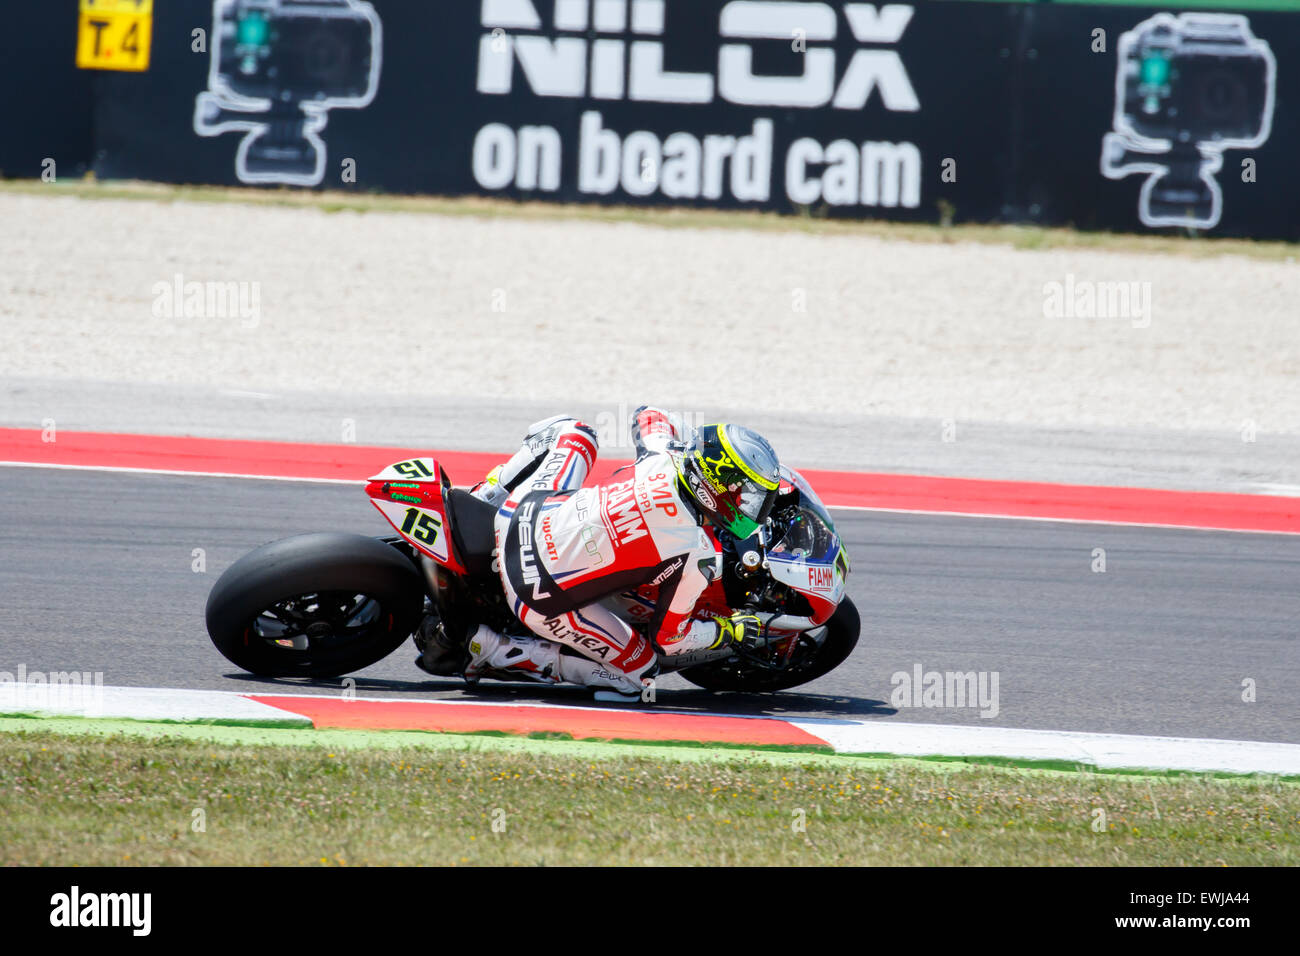 Misano Adriatico, Italy - June 20, 2015: Ducati Panigale R of Althea Racing Team, driven by BAIOCCO Matteo Stock Photo